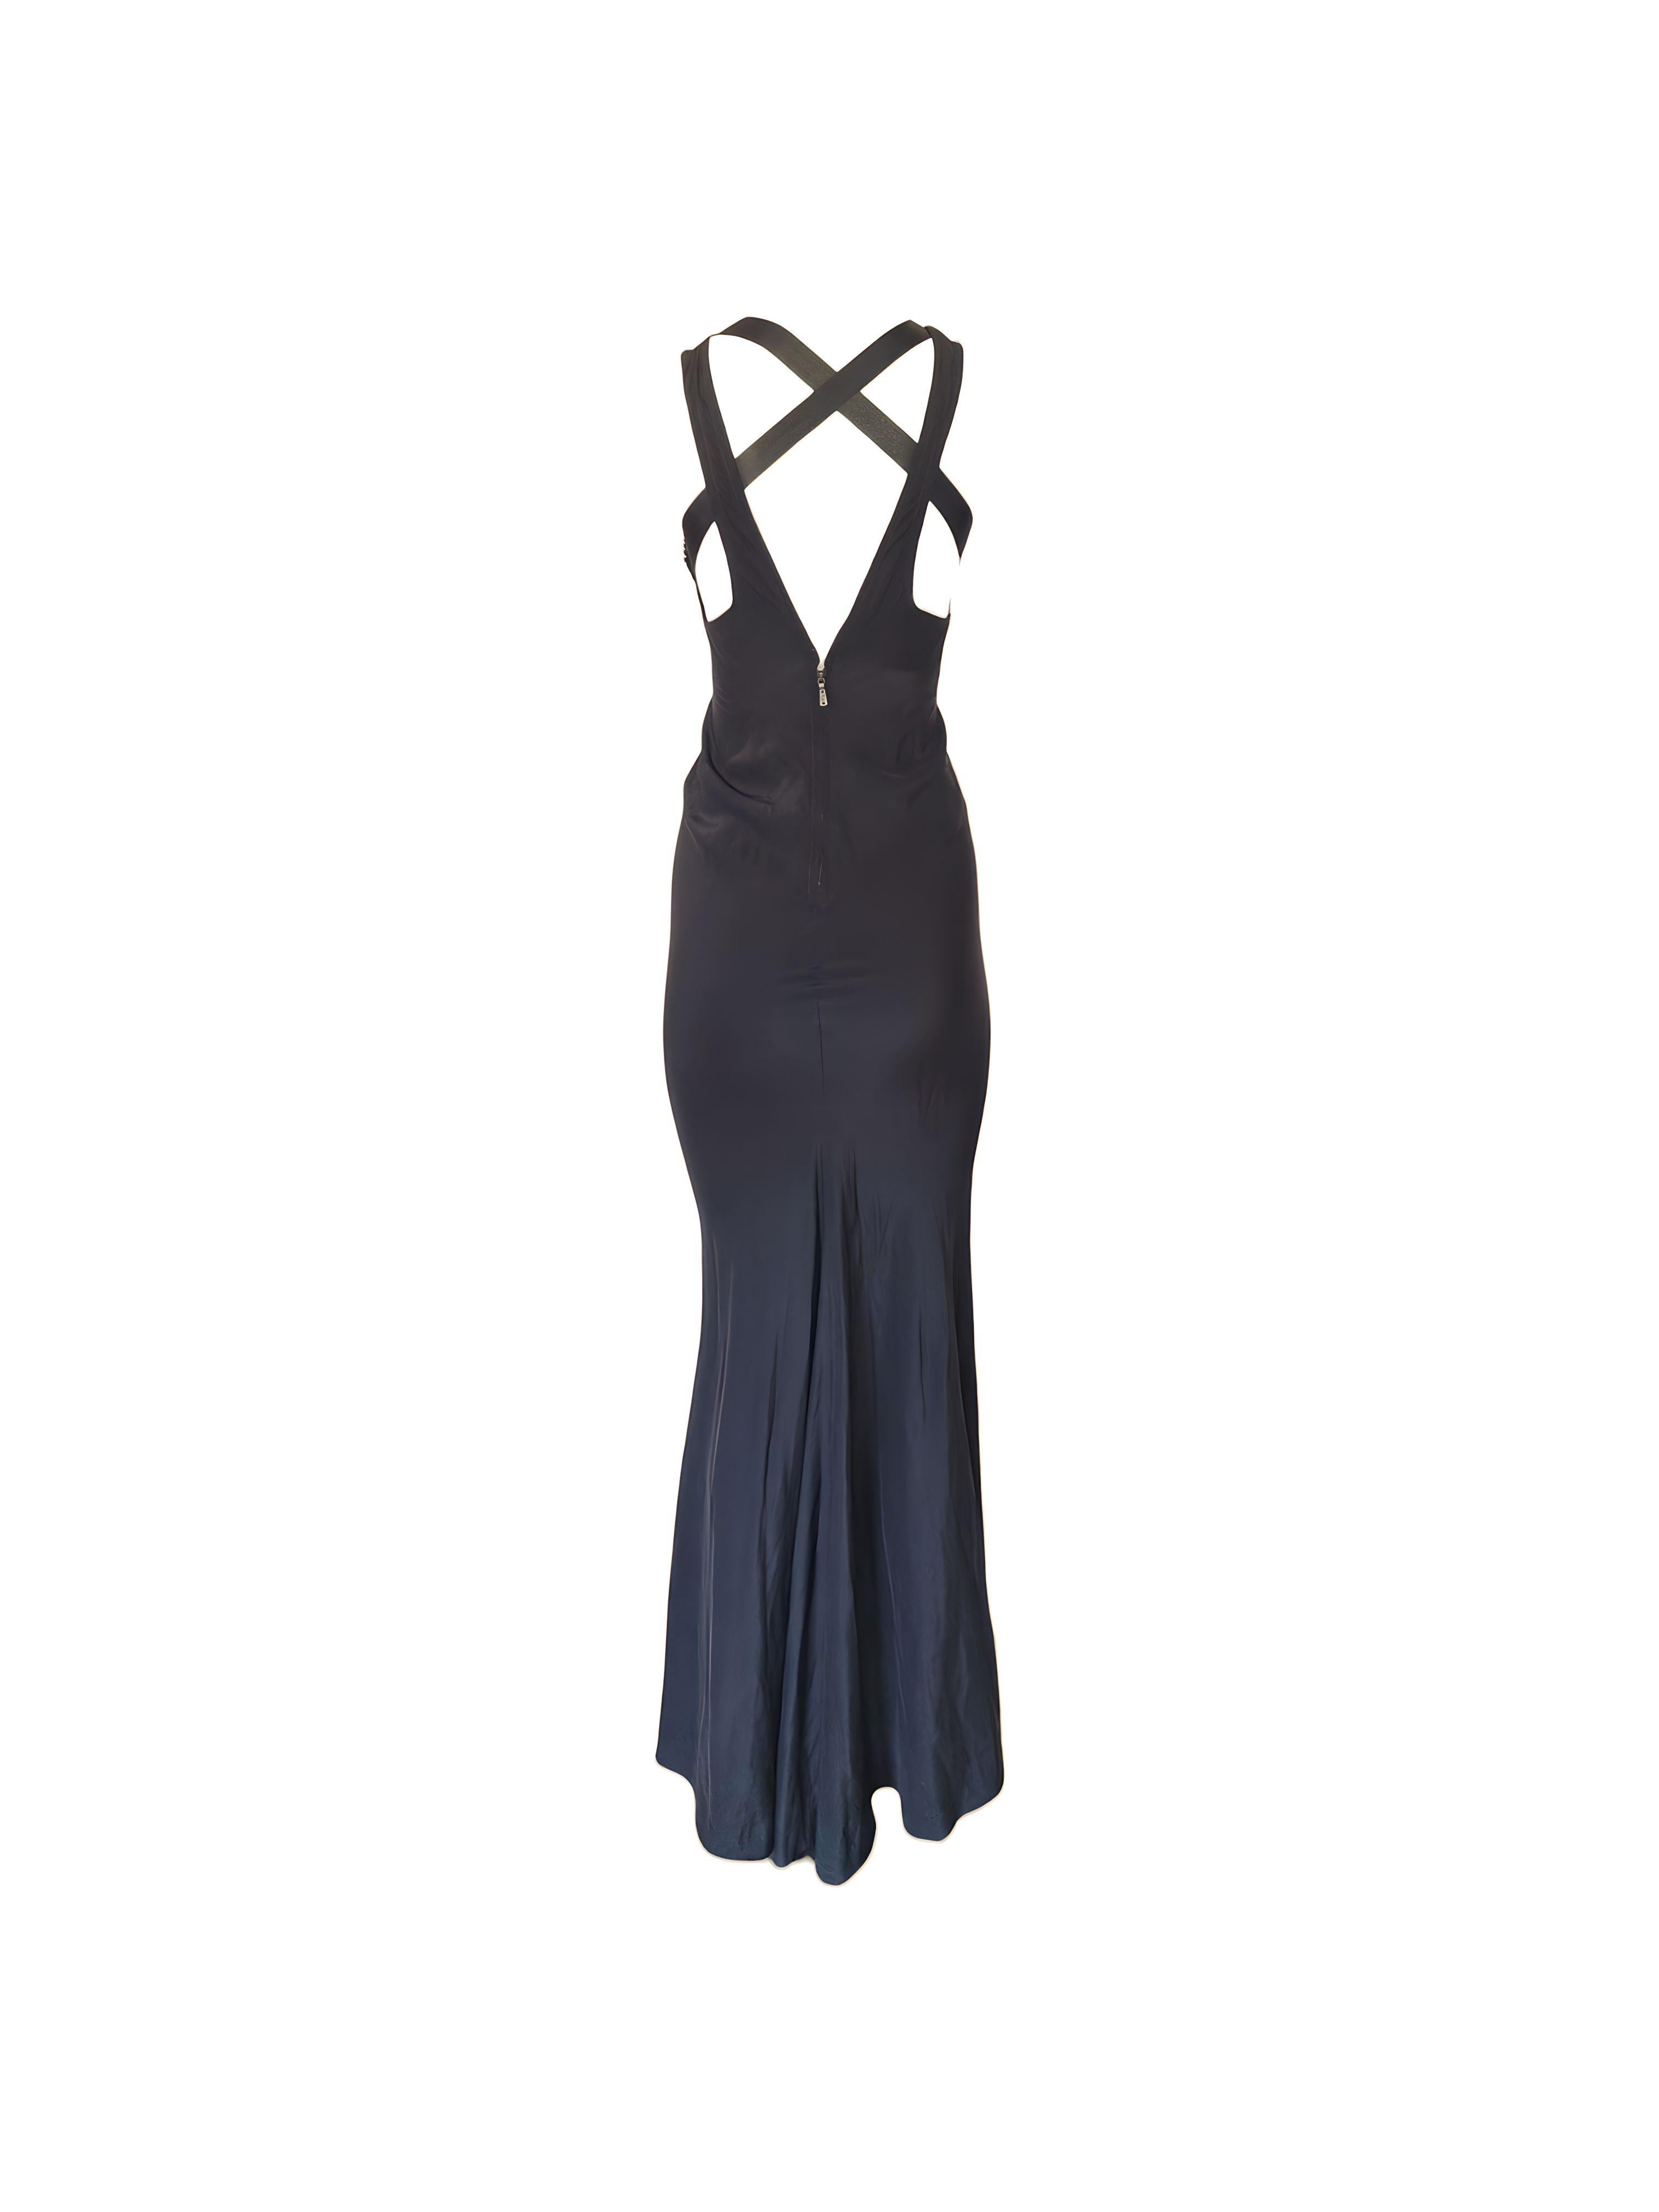 YSL by Tom Ford silk ribbon gown, FW 2003 In Excellent Condition For Sale In London, GB